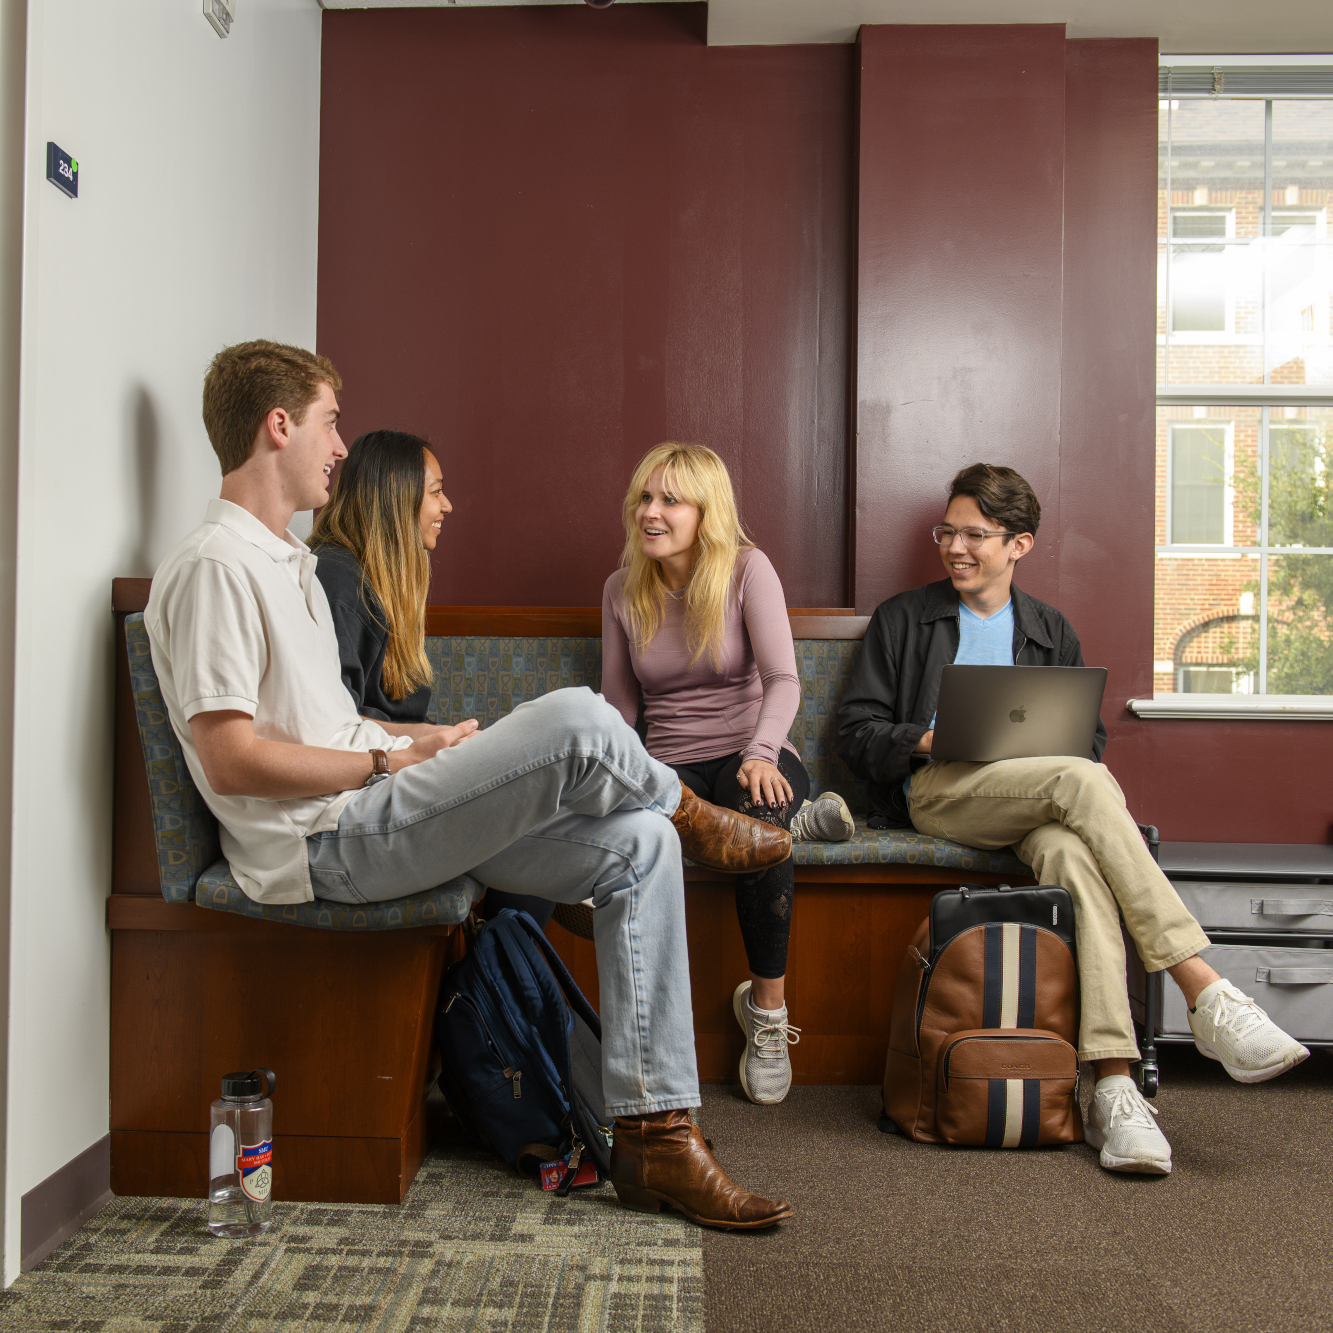 Four students sitting on indoor wooden benches, talking to each other